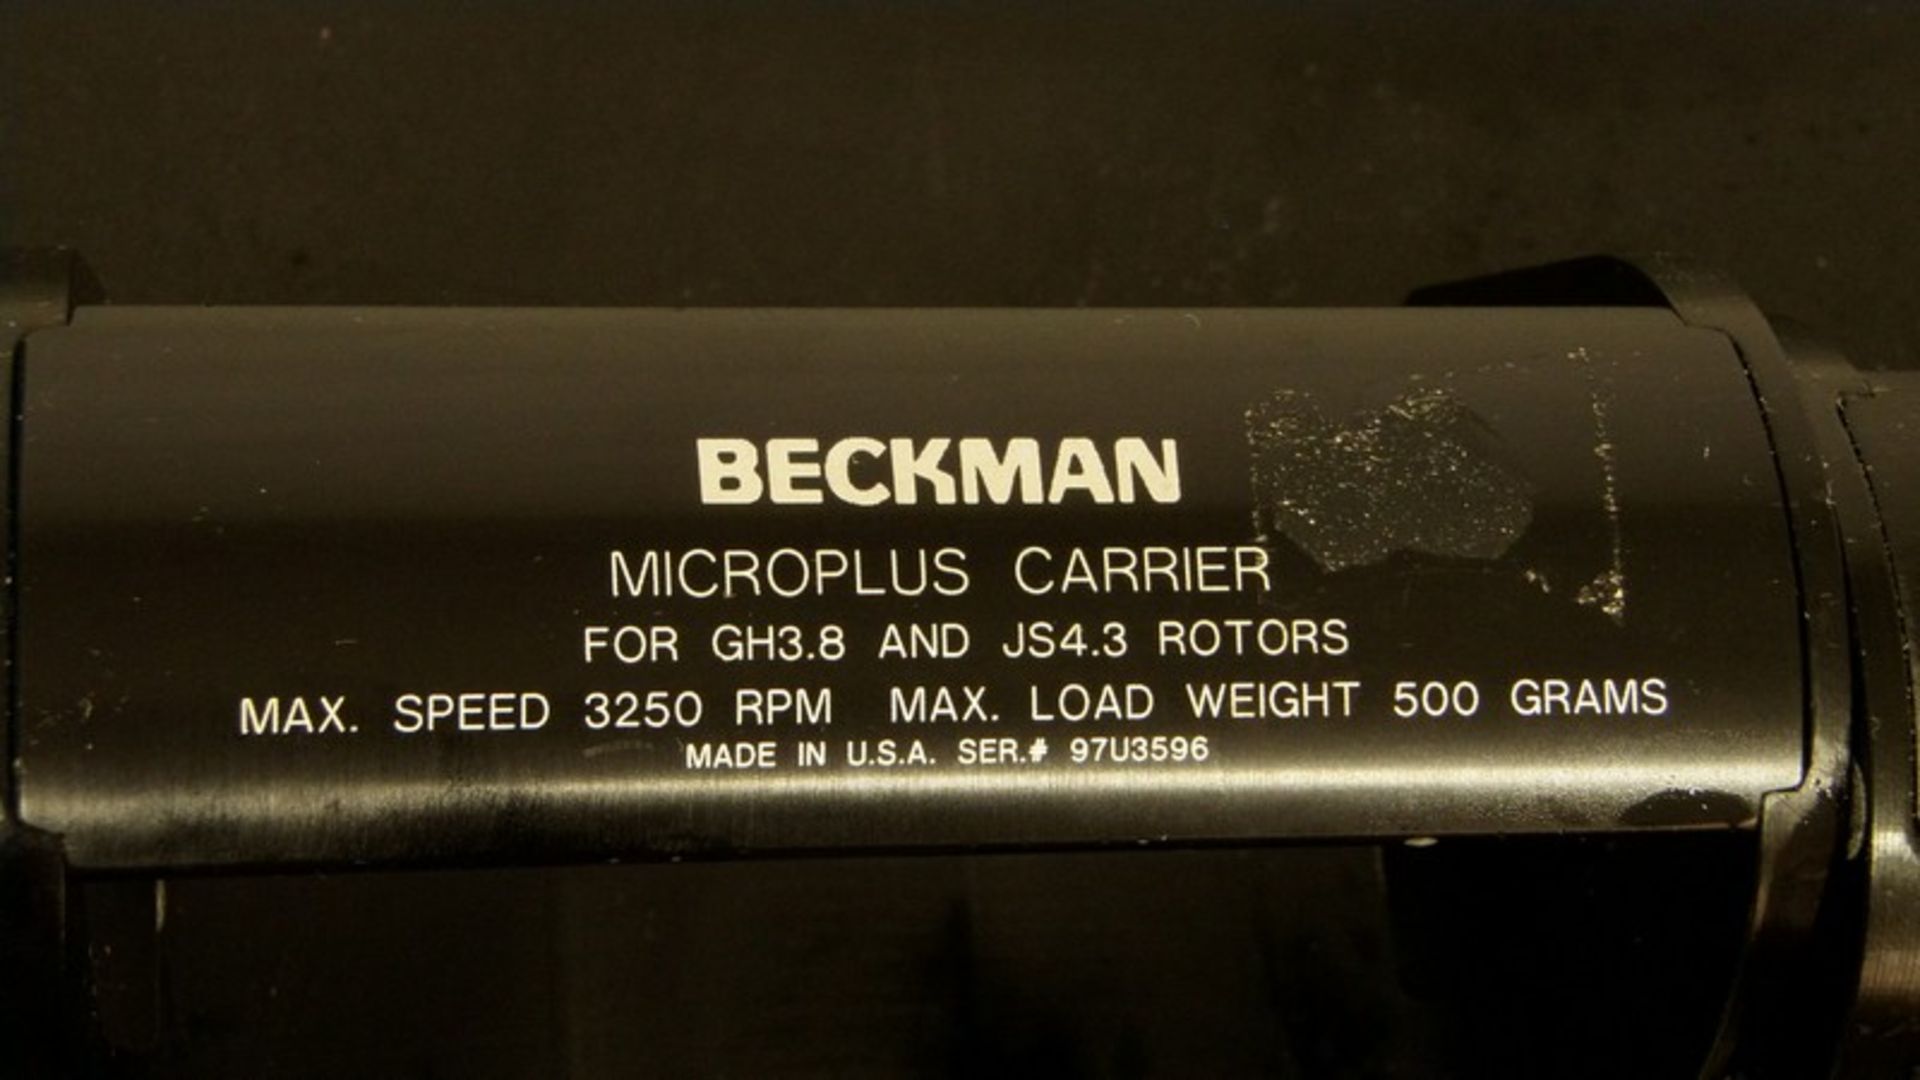 (2) Beckman Microplus Carriers for Use with GH3.8, GH3.8A, and JS4.3 Rotors, Max. Speed 3250, Max - Image 2 of 5